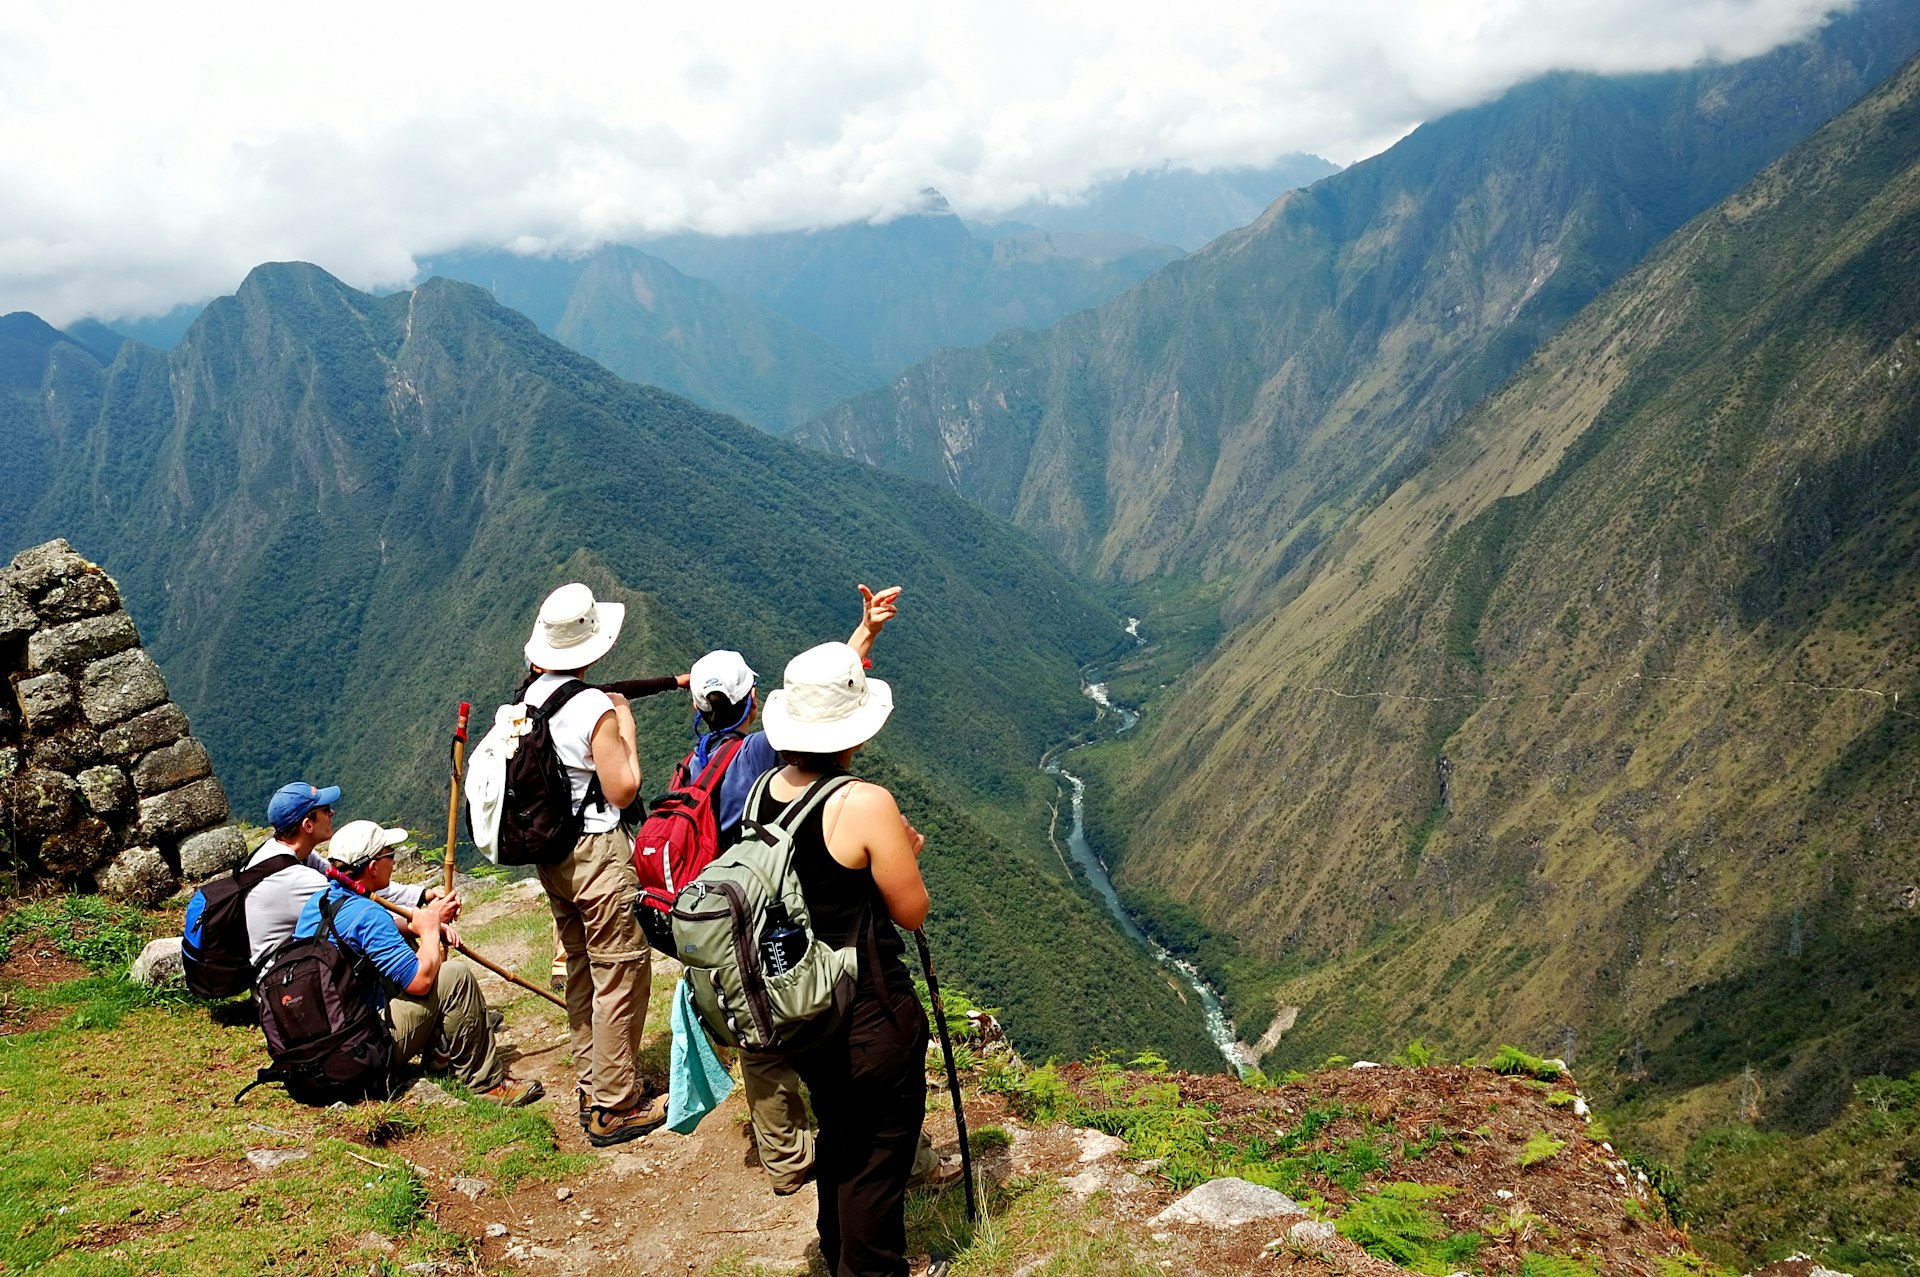 A group of hikers look out over a valley along the Inca Trail in Peru